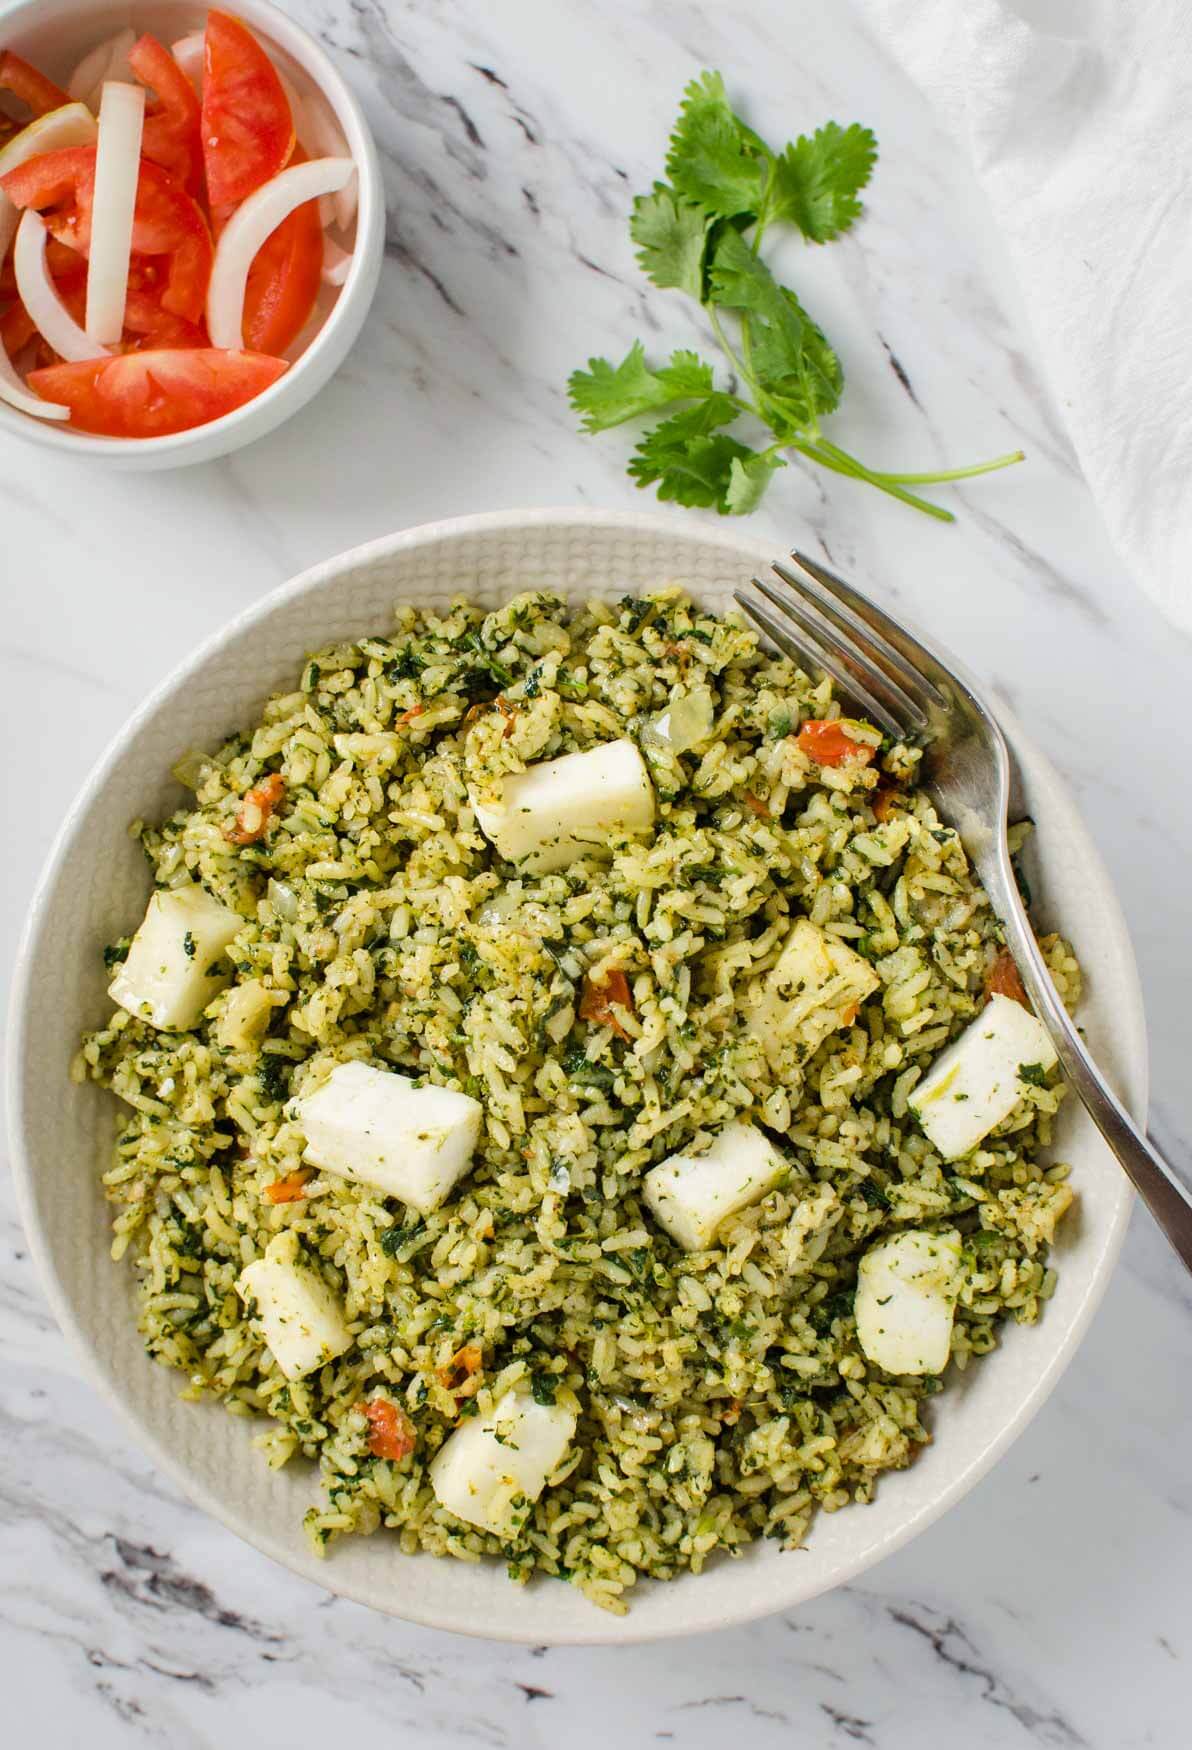 Turn authentic Indian palak paneer curry into a complete meal with this delicious one pot Easy Palak Paneer Rice recipe. #spinach #palakpaneer #healthyrecipes